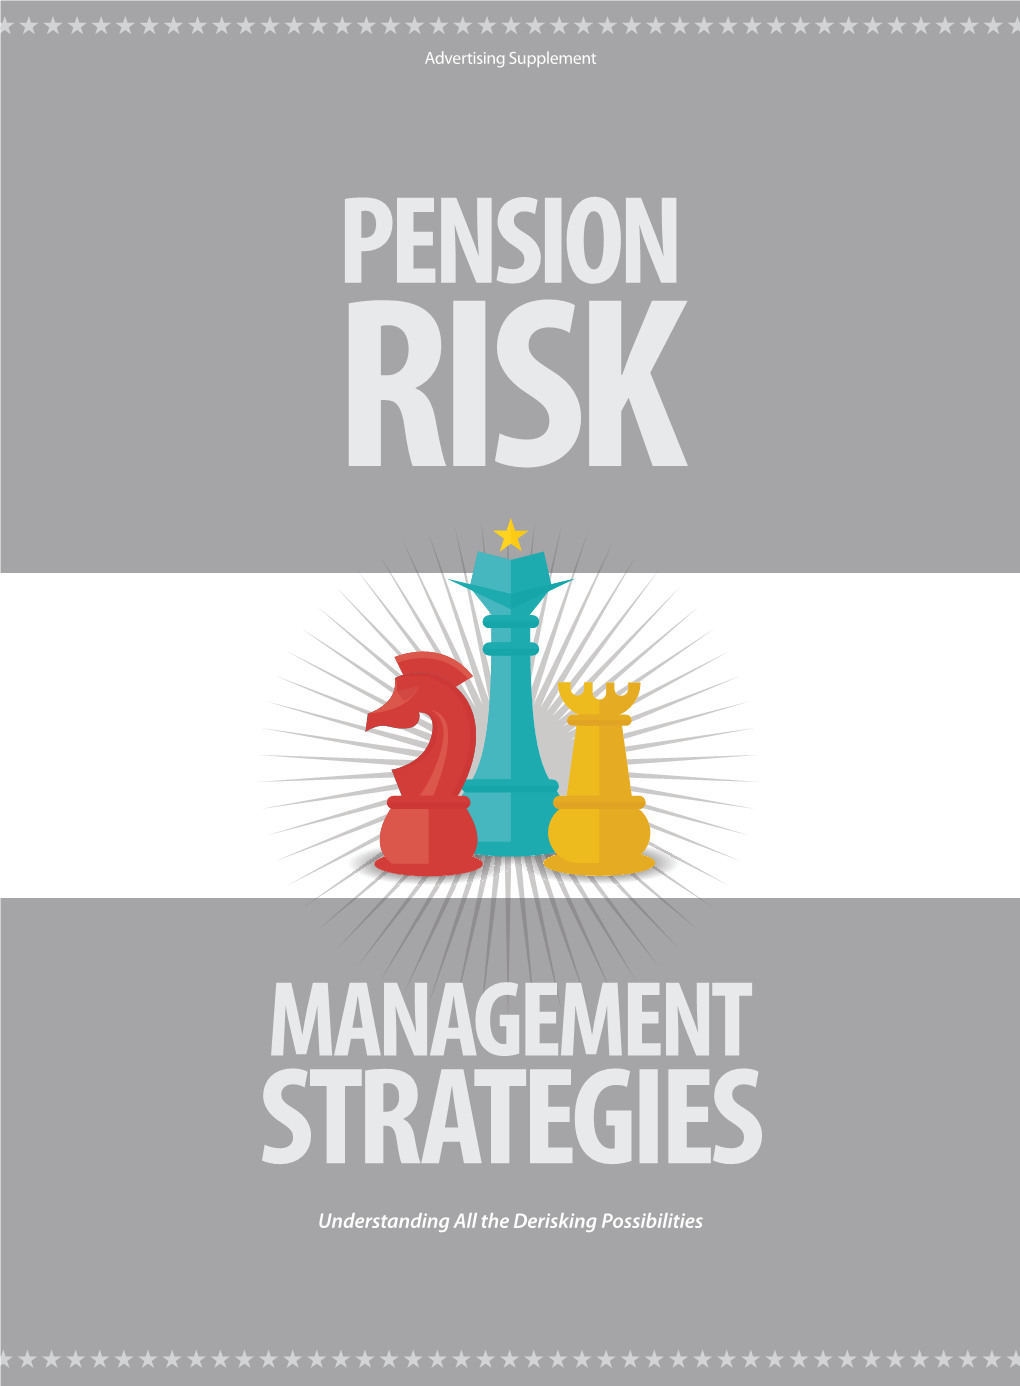 Pension Risk Strategy Summit Supplement